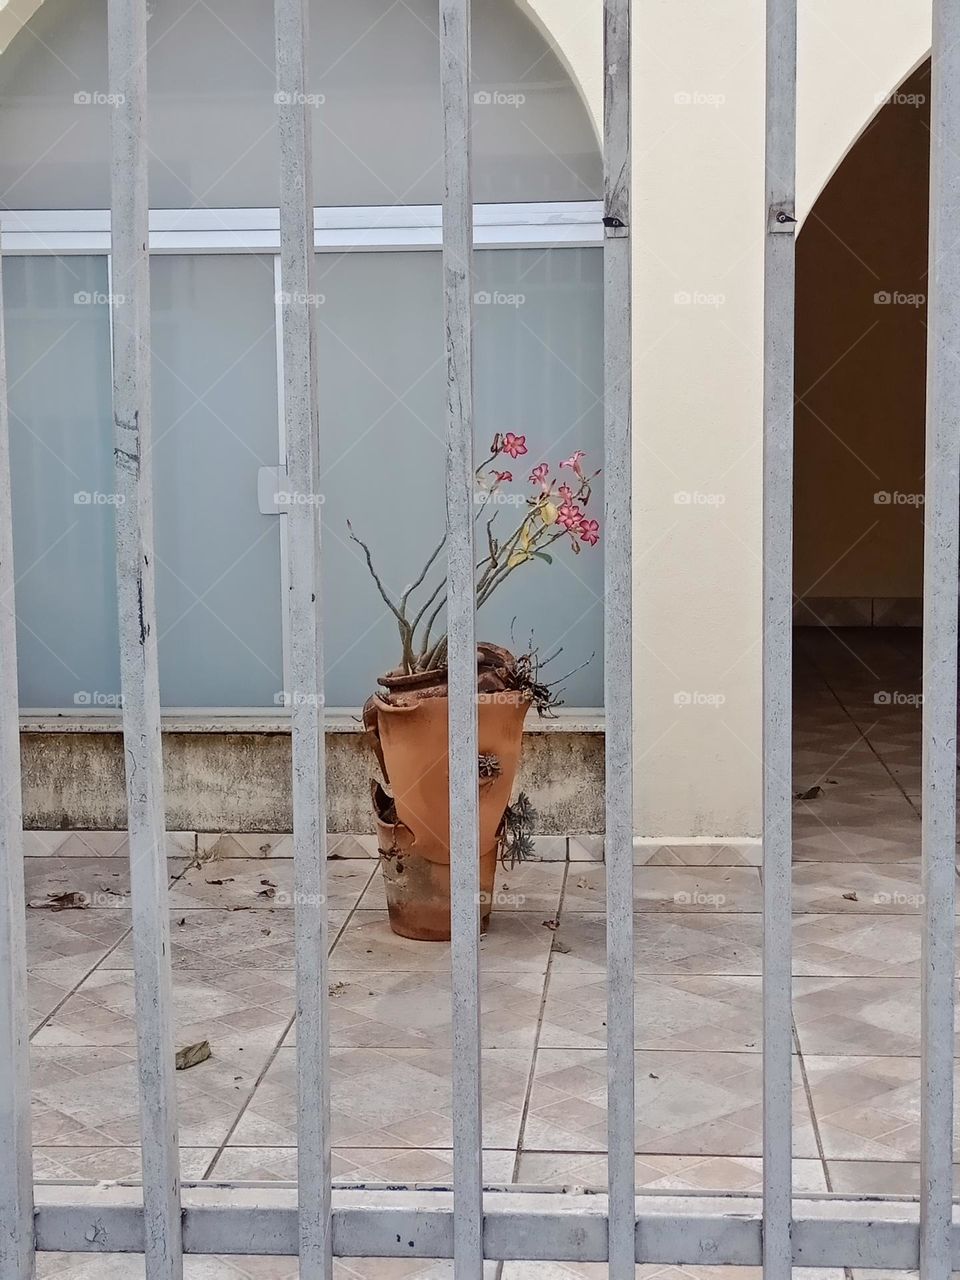 Abandoned house for sale with a broken ceramic vase, with a pink desert rose, view from front gate